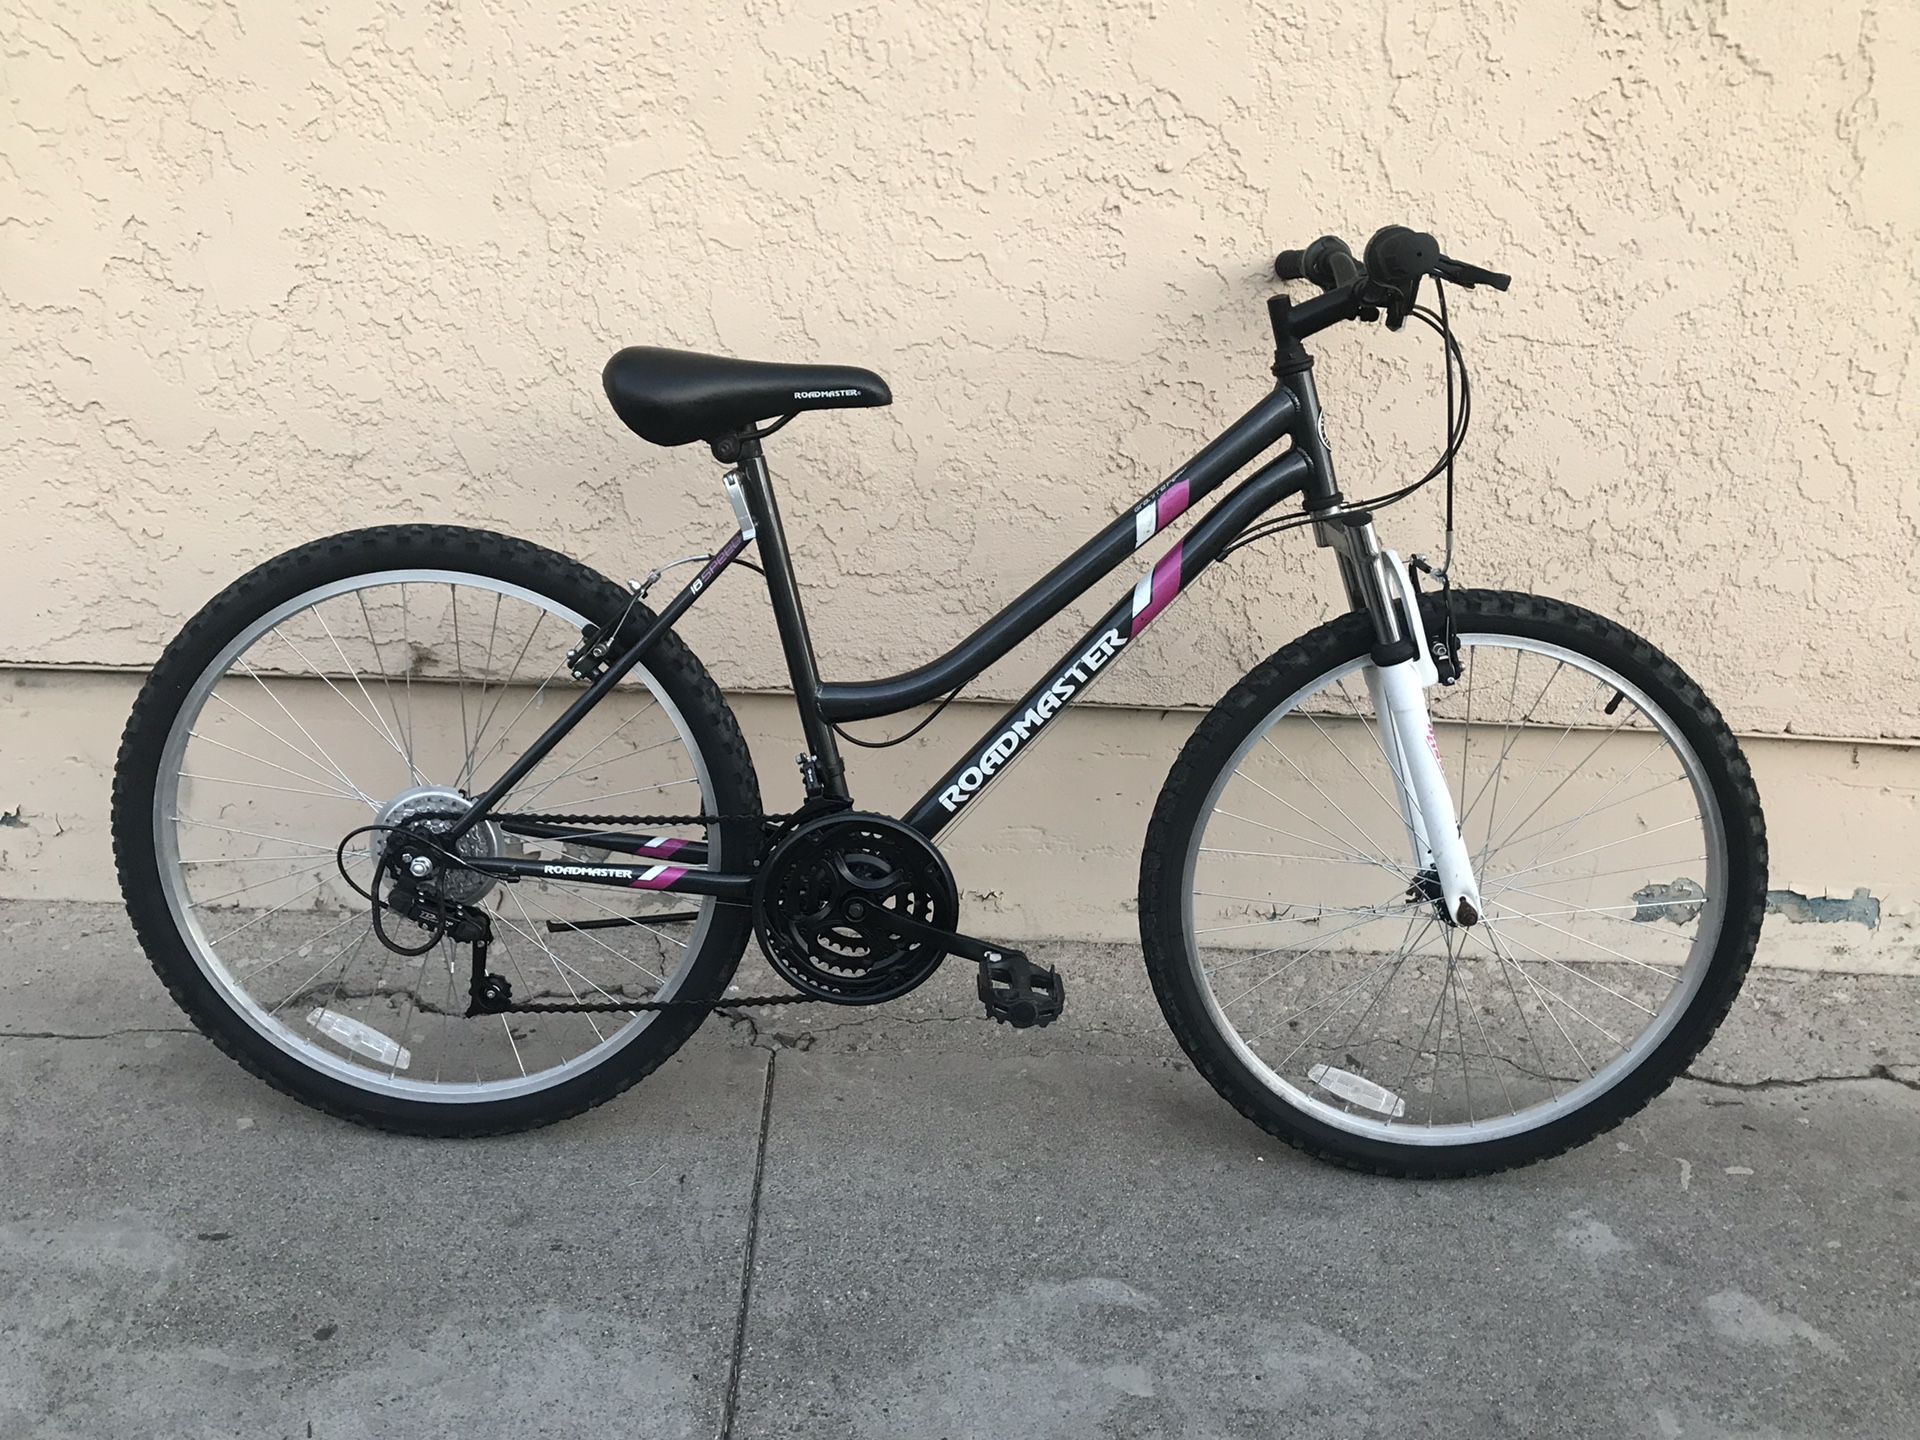 Road master women’s mountain bike/ excellent working condition/ $65